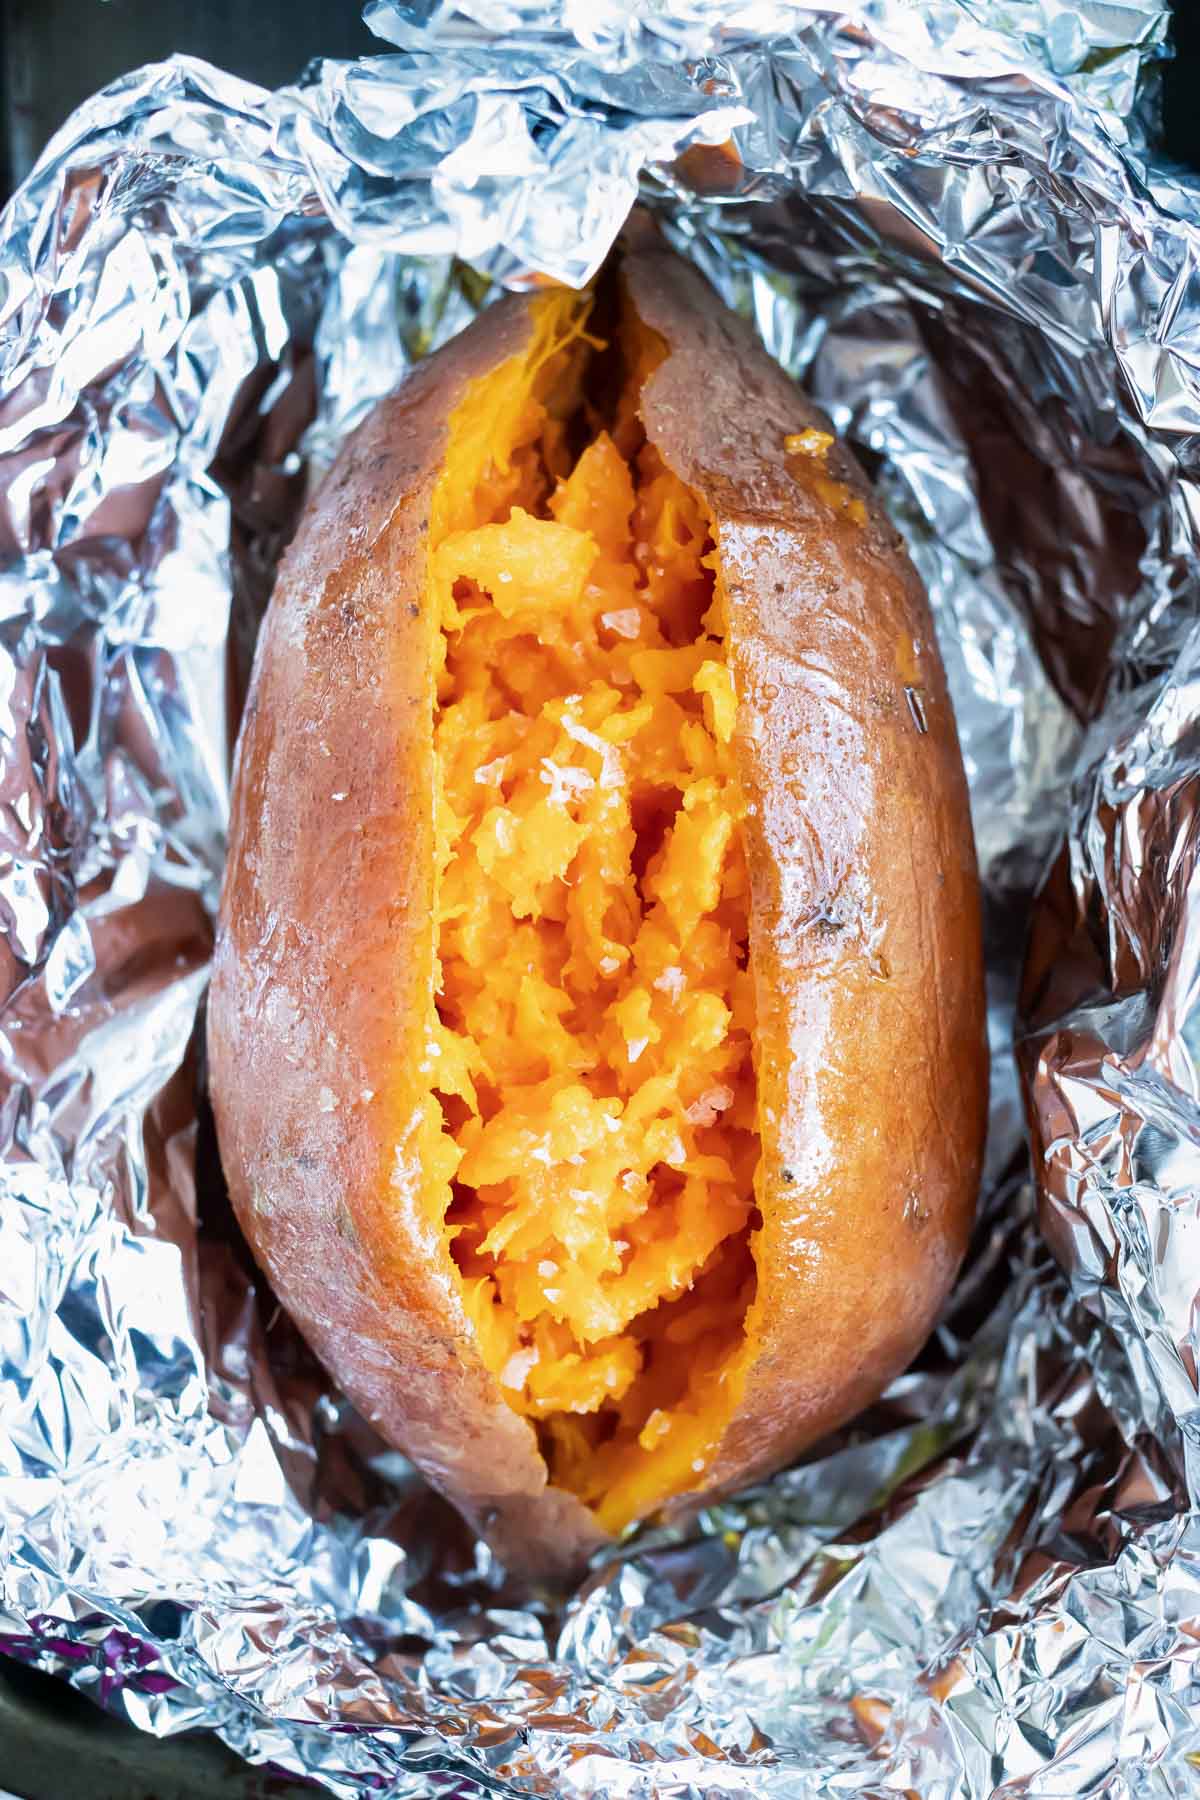 A sweet potato that has been cut in half and has been baked in the oven and wrapped in foil.